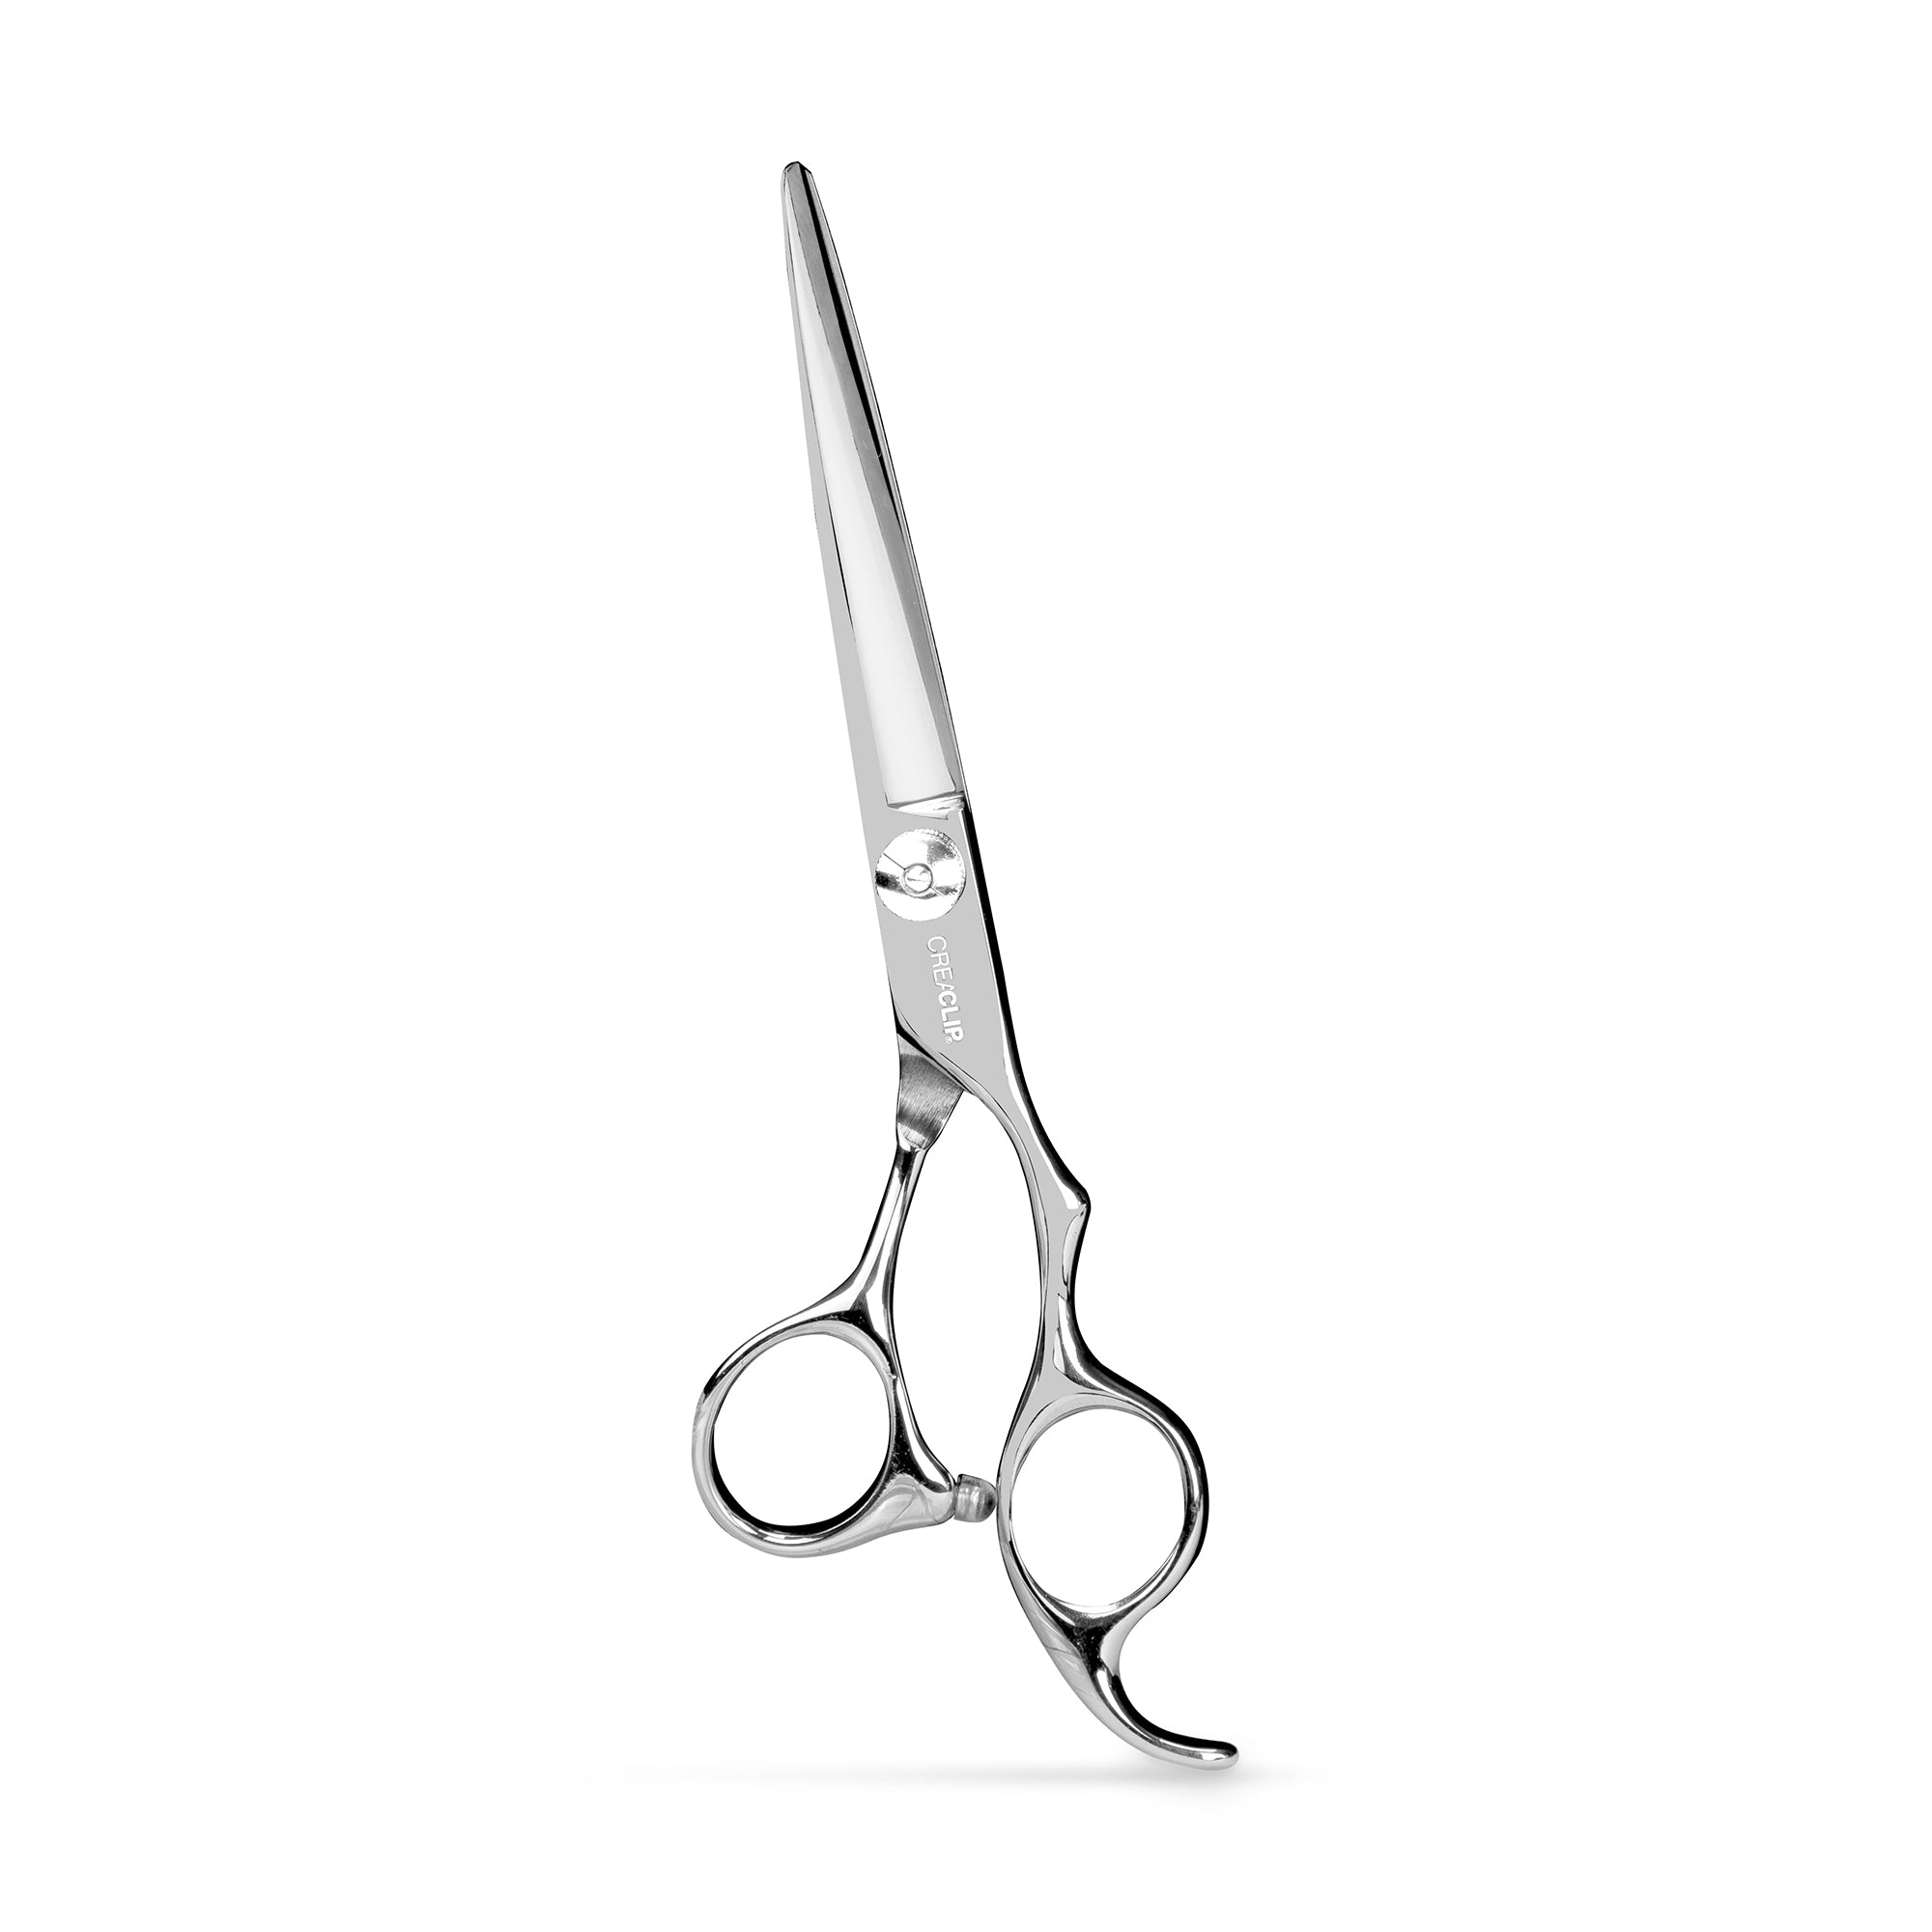 Cutting Women's Hair at Home with Scissors: A Step By Step Guide - Japan  Scissors USA